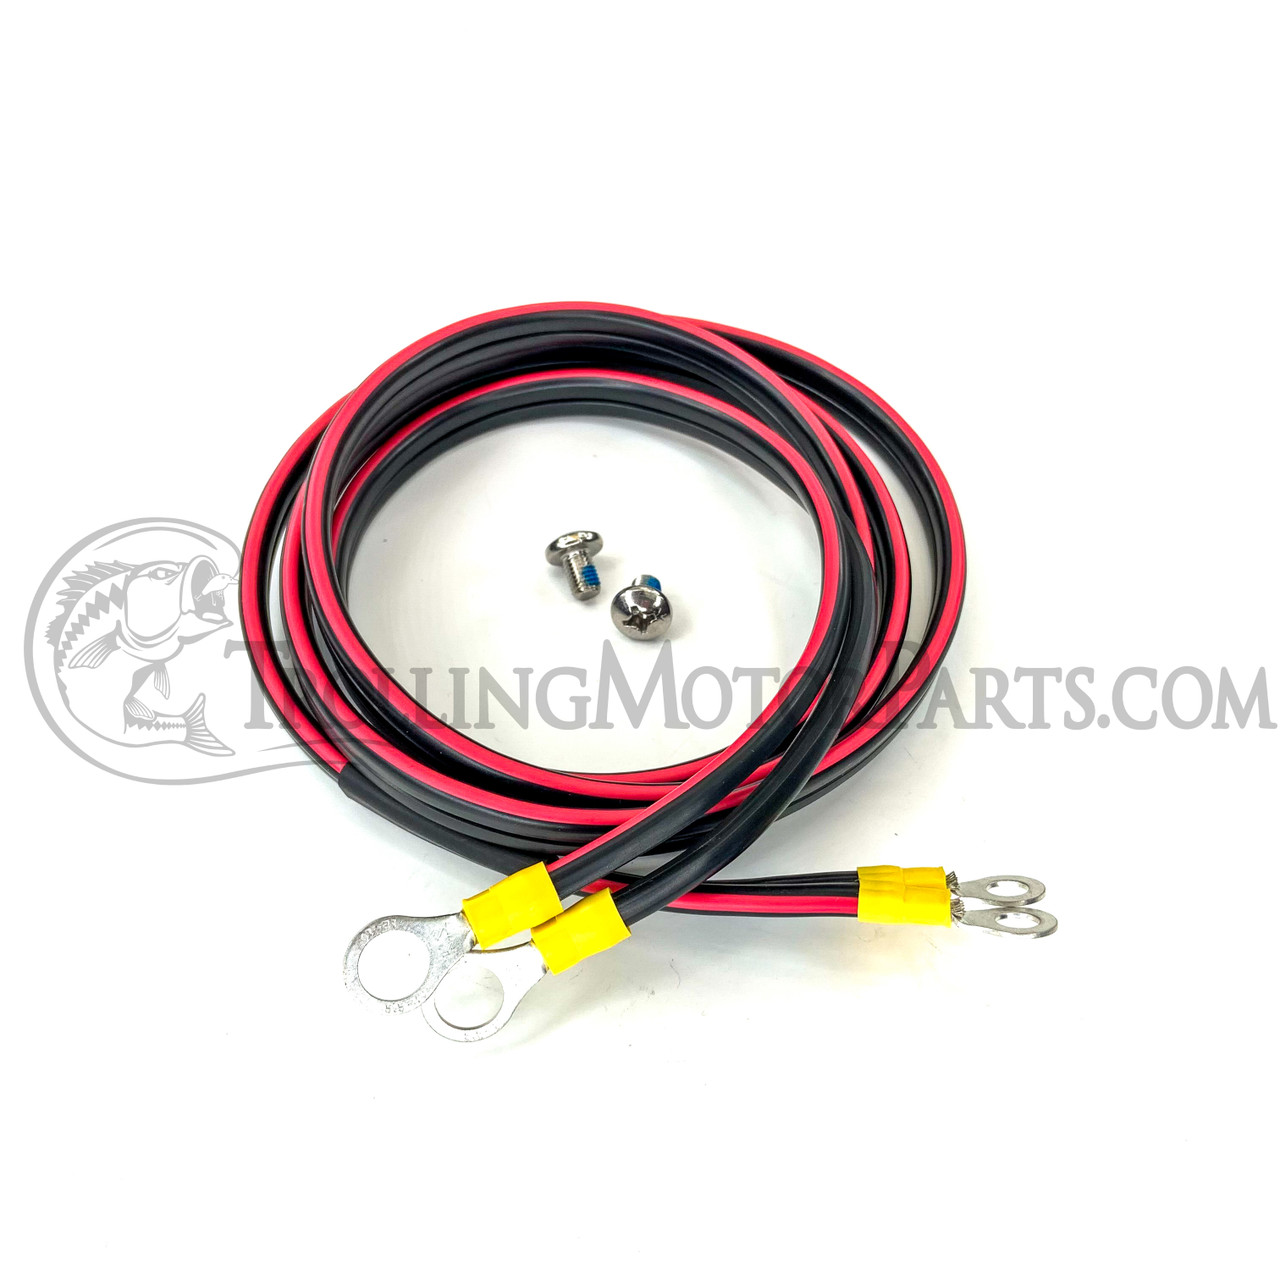 Motor Guide Tour Battery Cable Kit - Trollingmotorparts.com